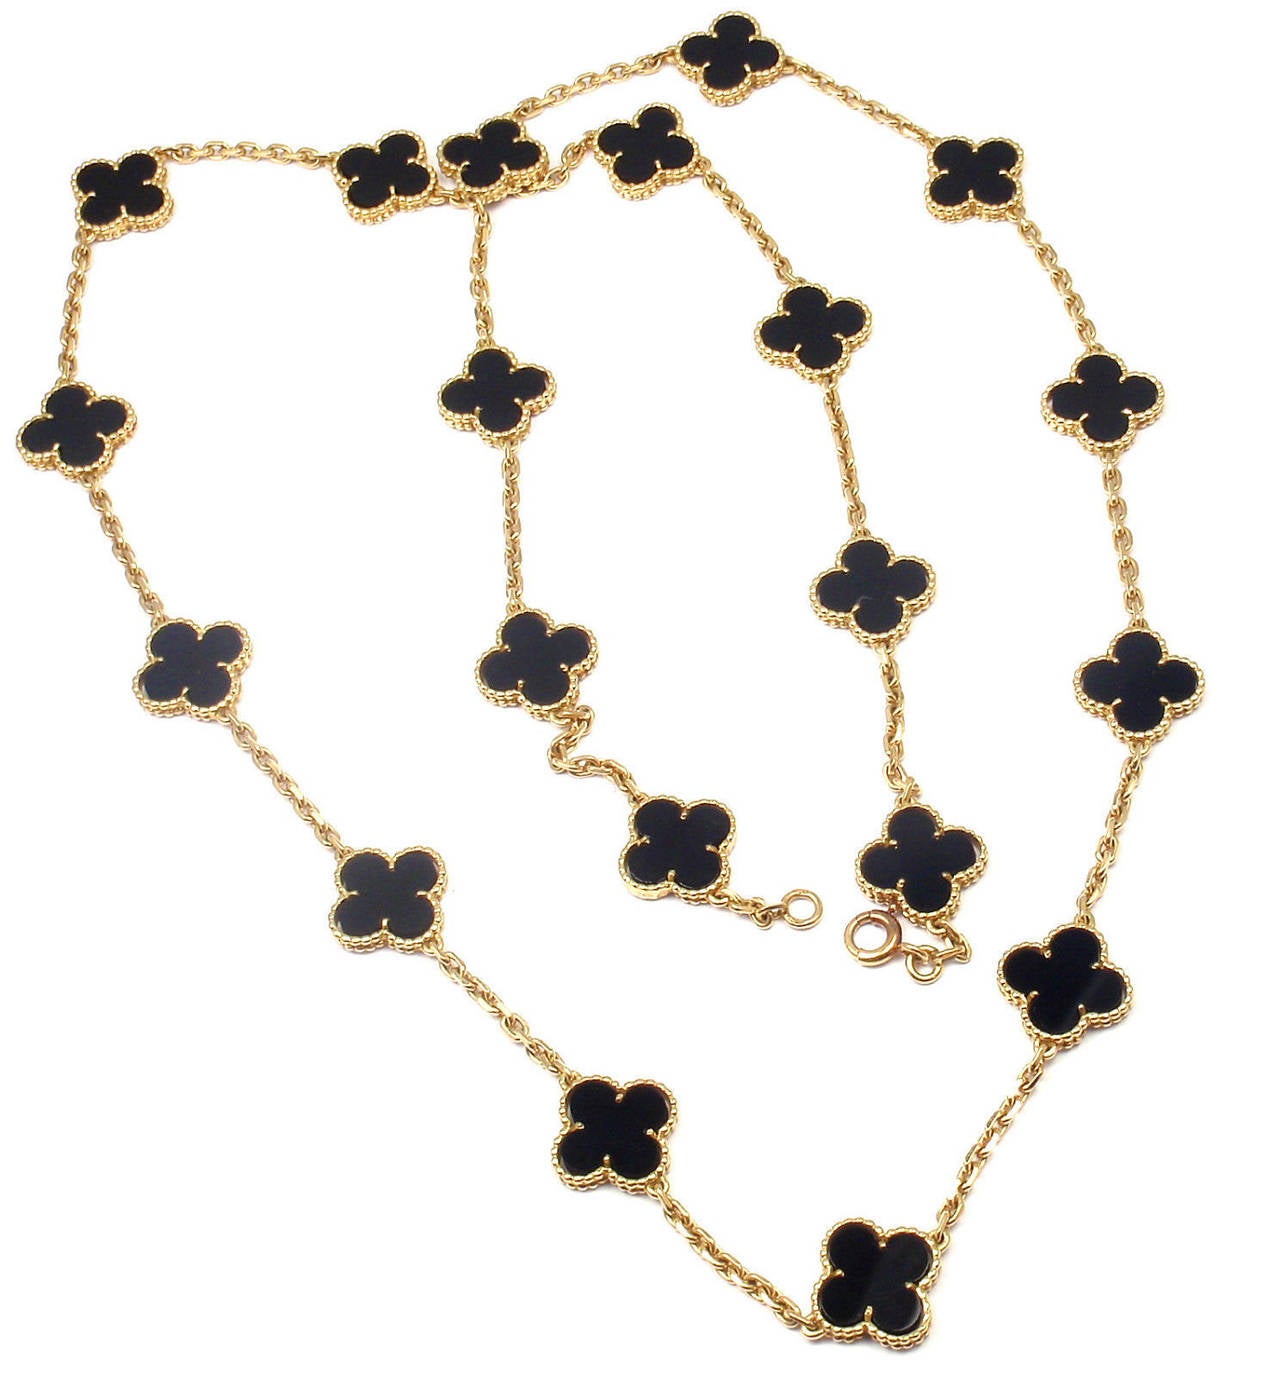 18k Yellow Gold Alhambra 20 Motifs Black Onyx Necklace by 
Van Cleef & Arpels, with 20 motifs of black onyx Alhambra stones, 15mm each.

This is a rare, very collectible, antique Van Cleef & Arpels black onyx Alhambra 
necklace from the 1970's.